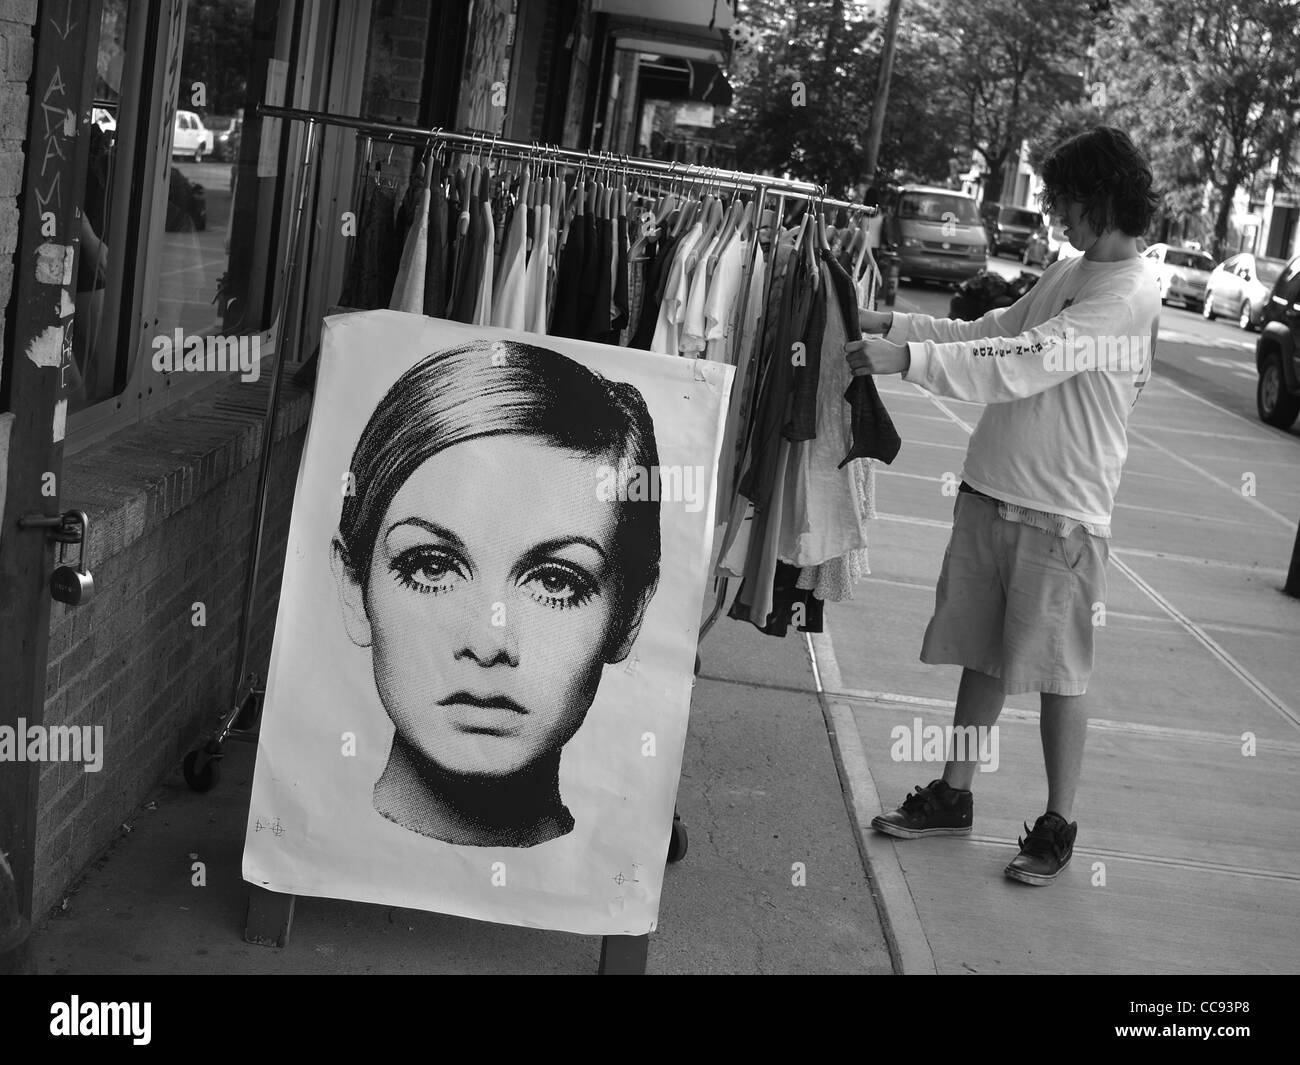 Shopping for clothes in Williamsburg, Brooklyn, near a poster of 60s British supermodel Twiggy Stock Photo